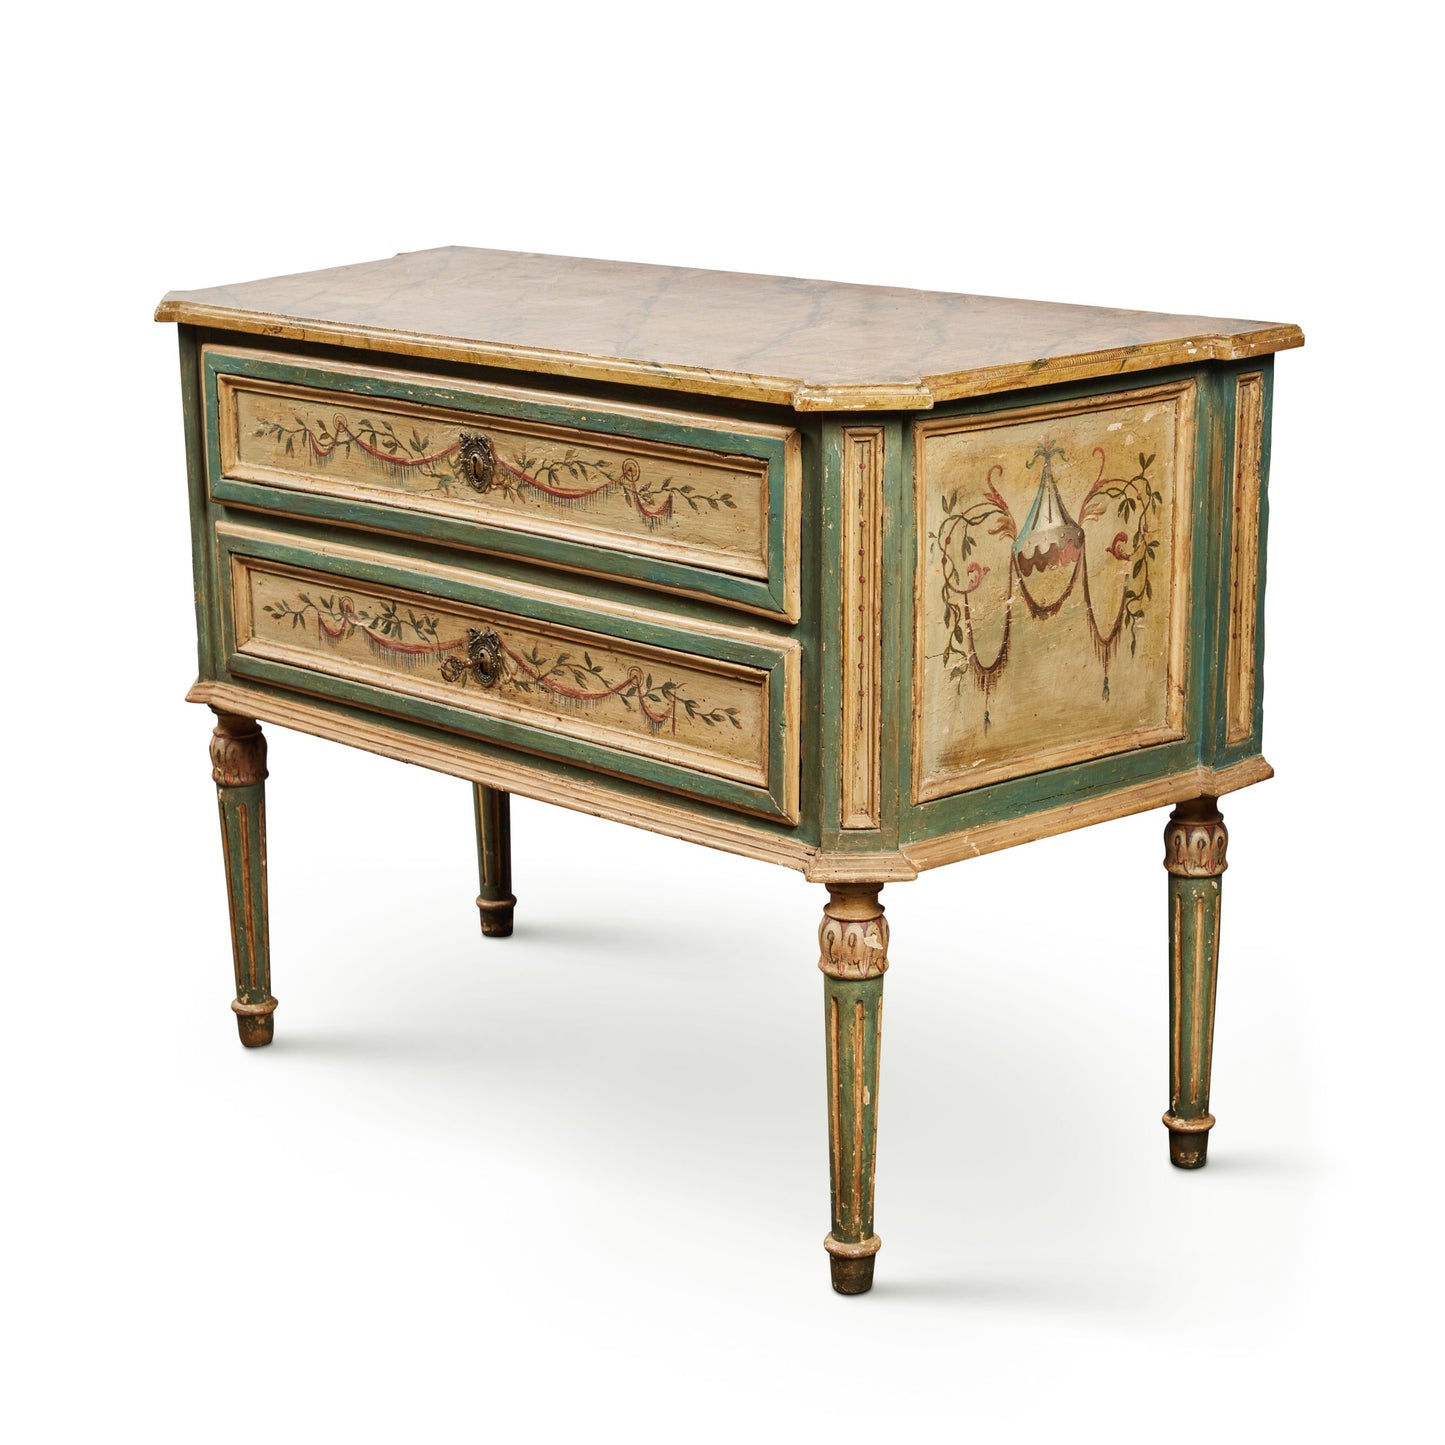 Canted Corner, Painted Venetian Commode